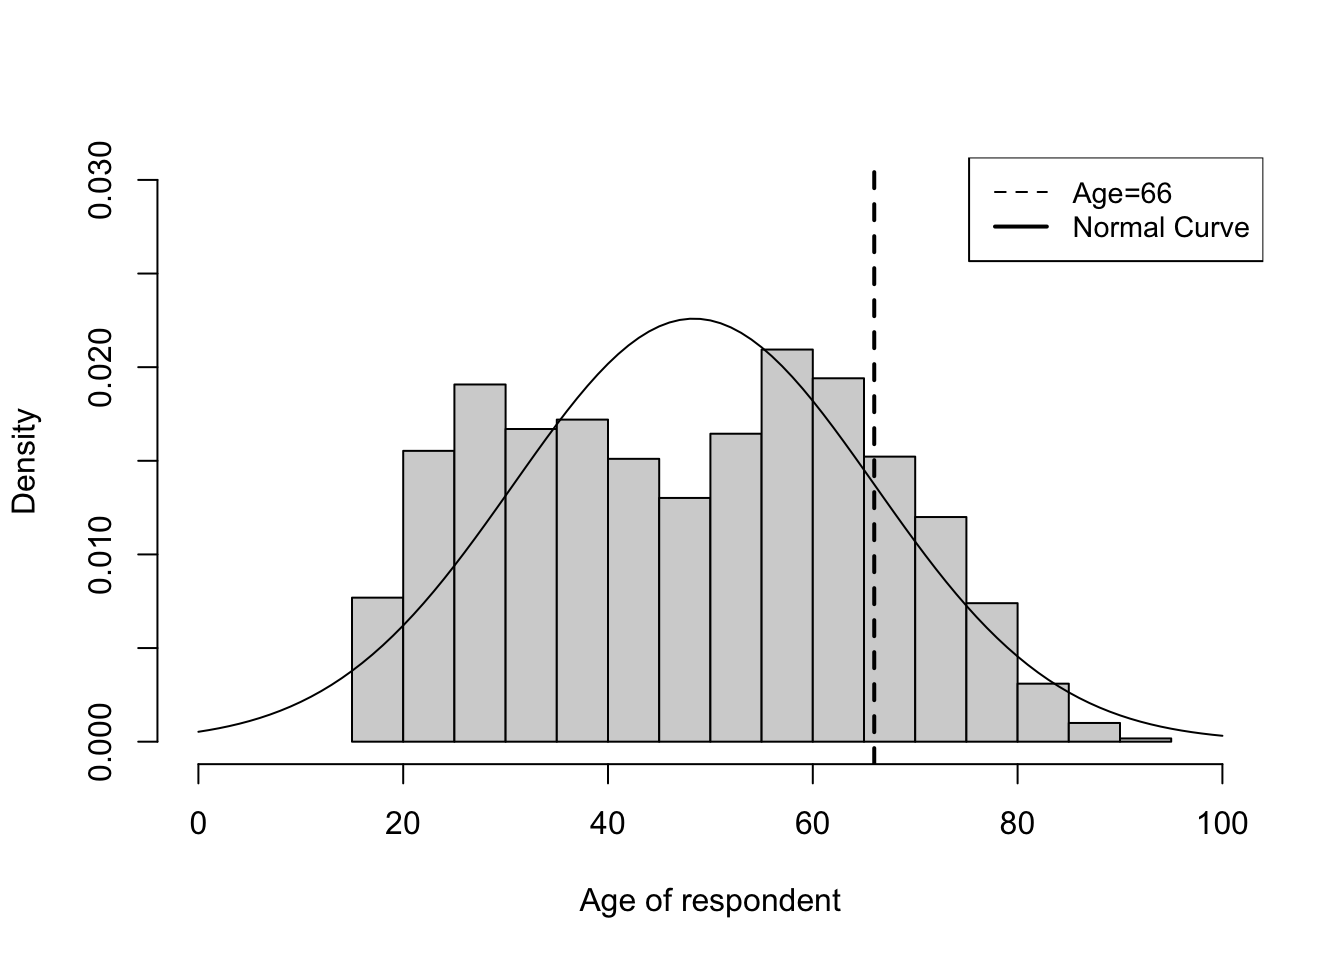 Camparing the Emipircal Histogram for Age with the Normal Curve